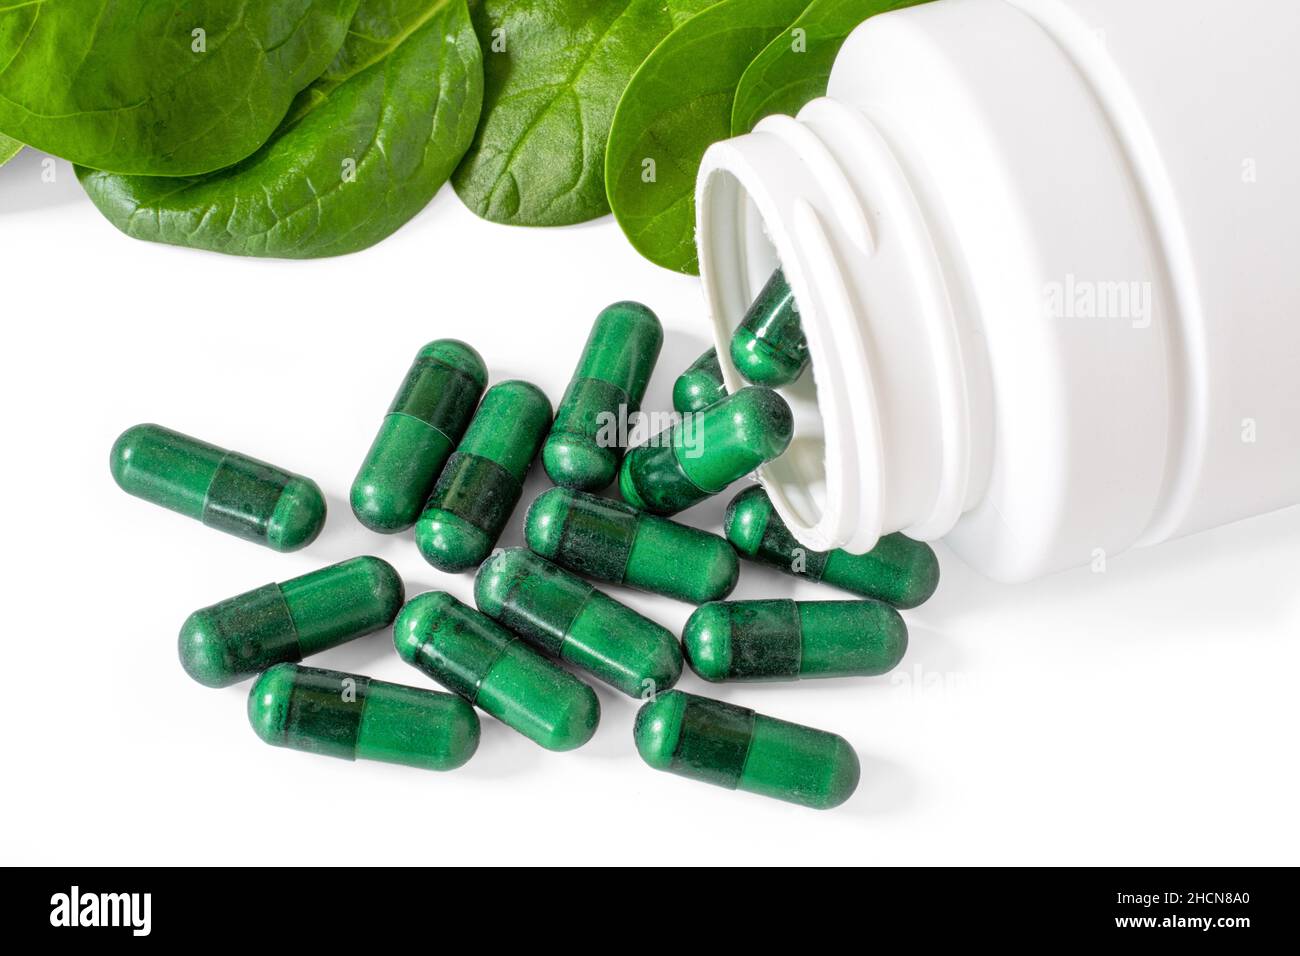 Green supplement capsules with spinach leaves on white. Stock Photo